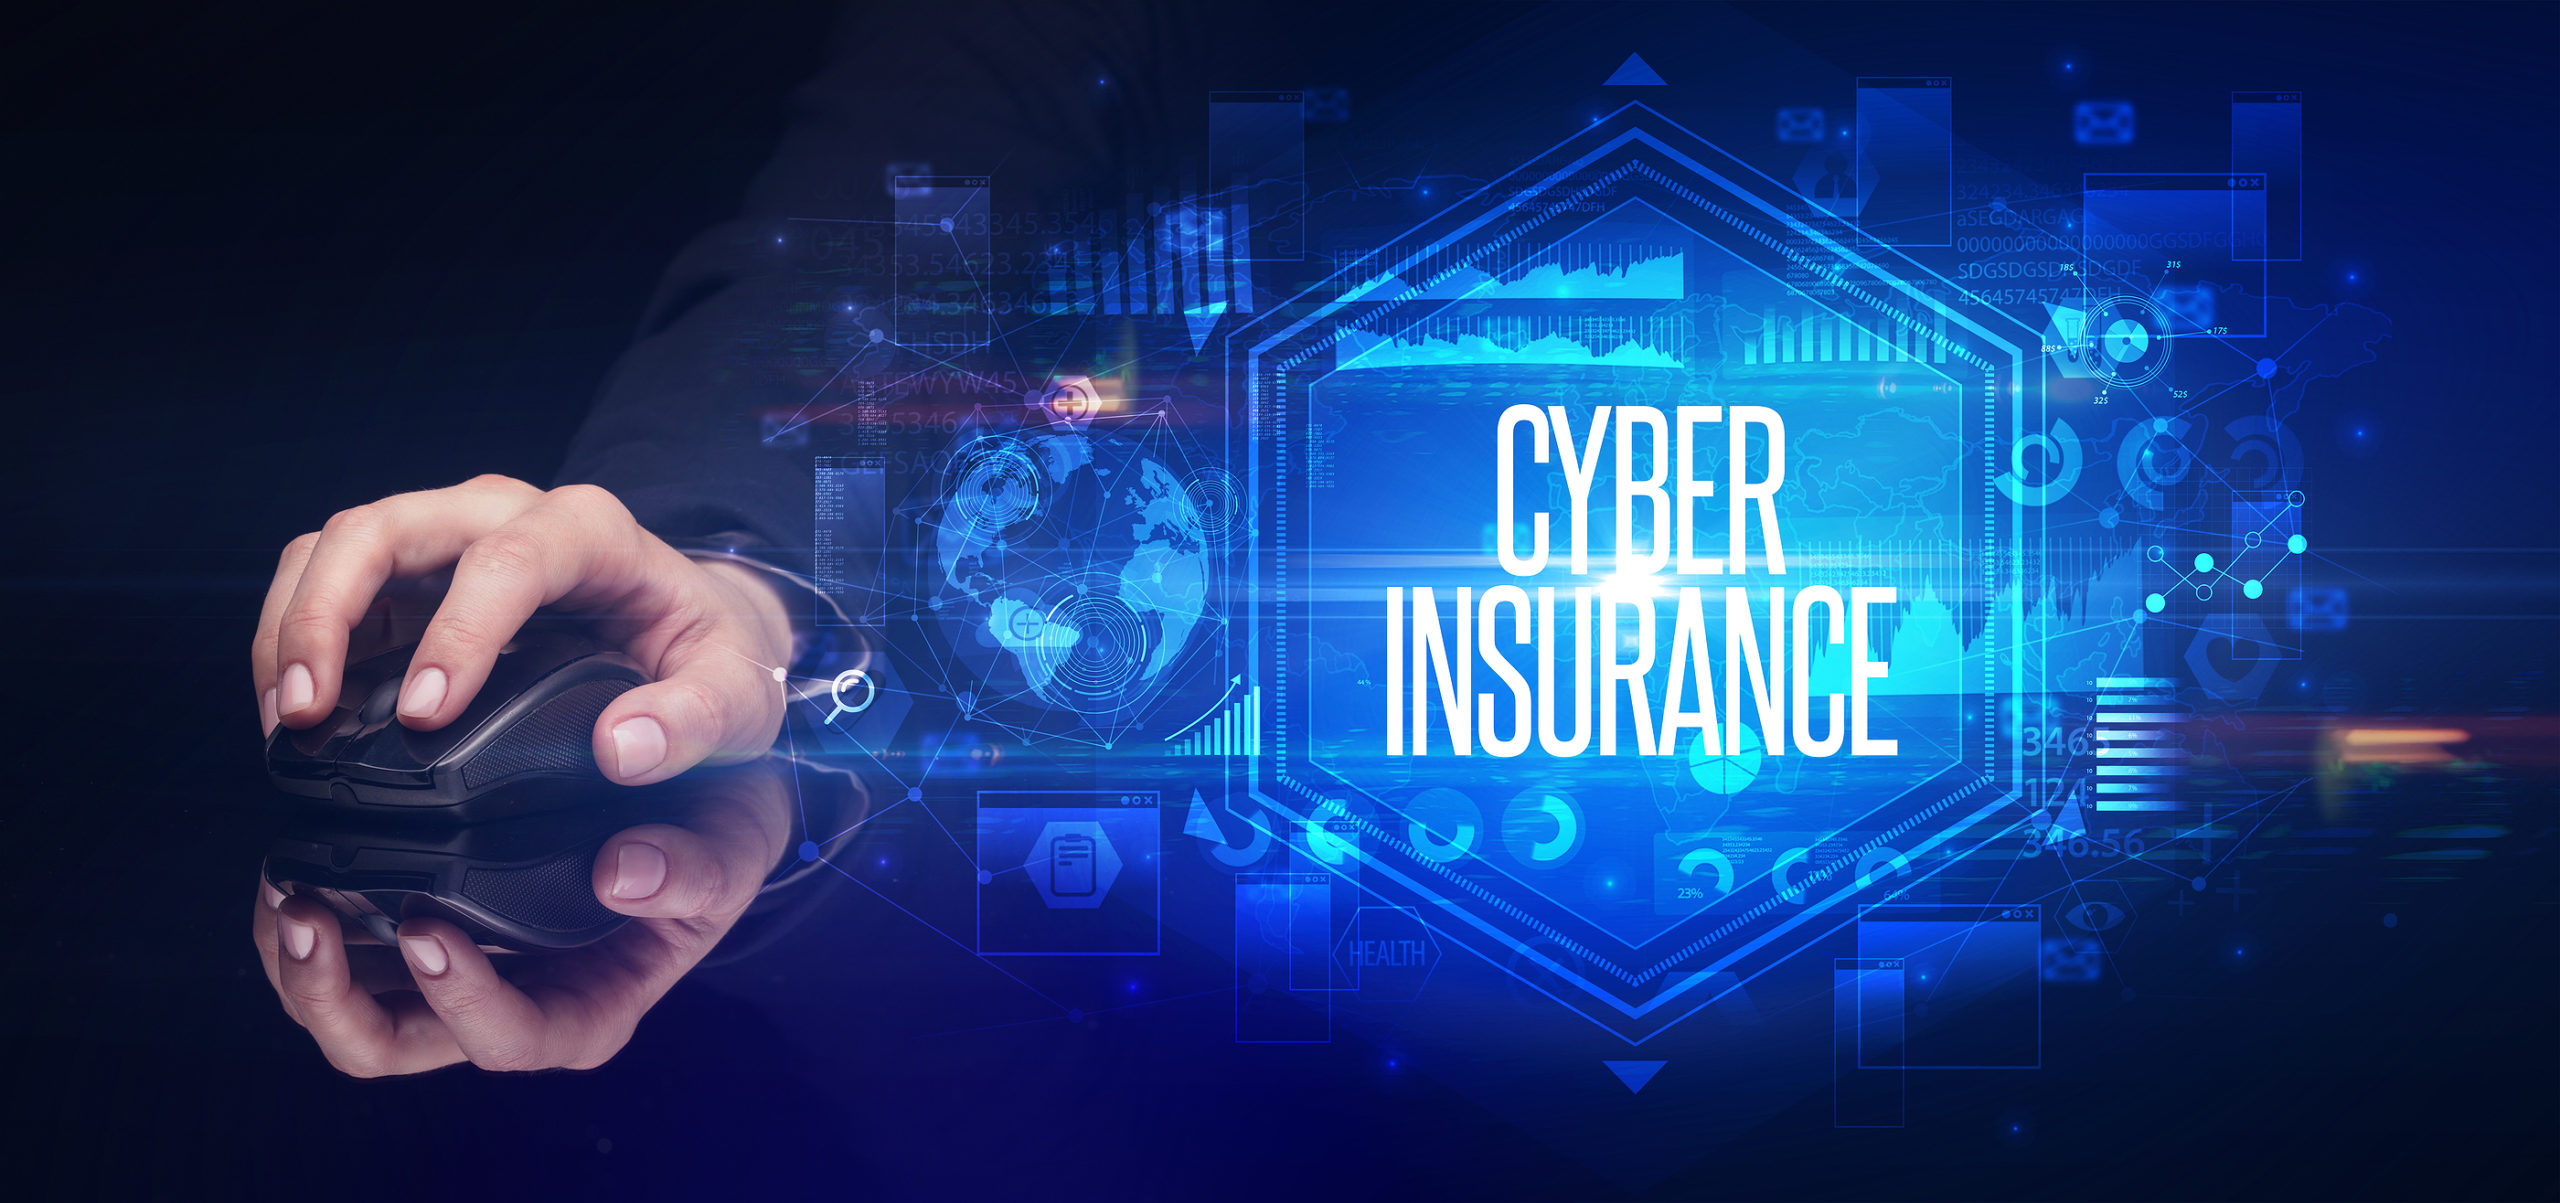 What Is Cybersecurity Insurance and Should Our Company Consider It?